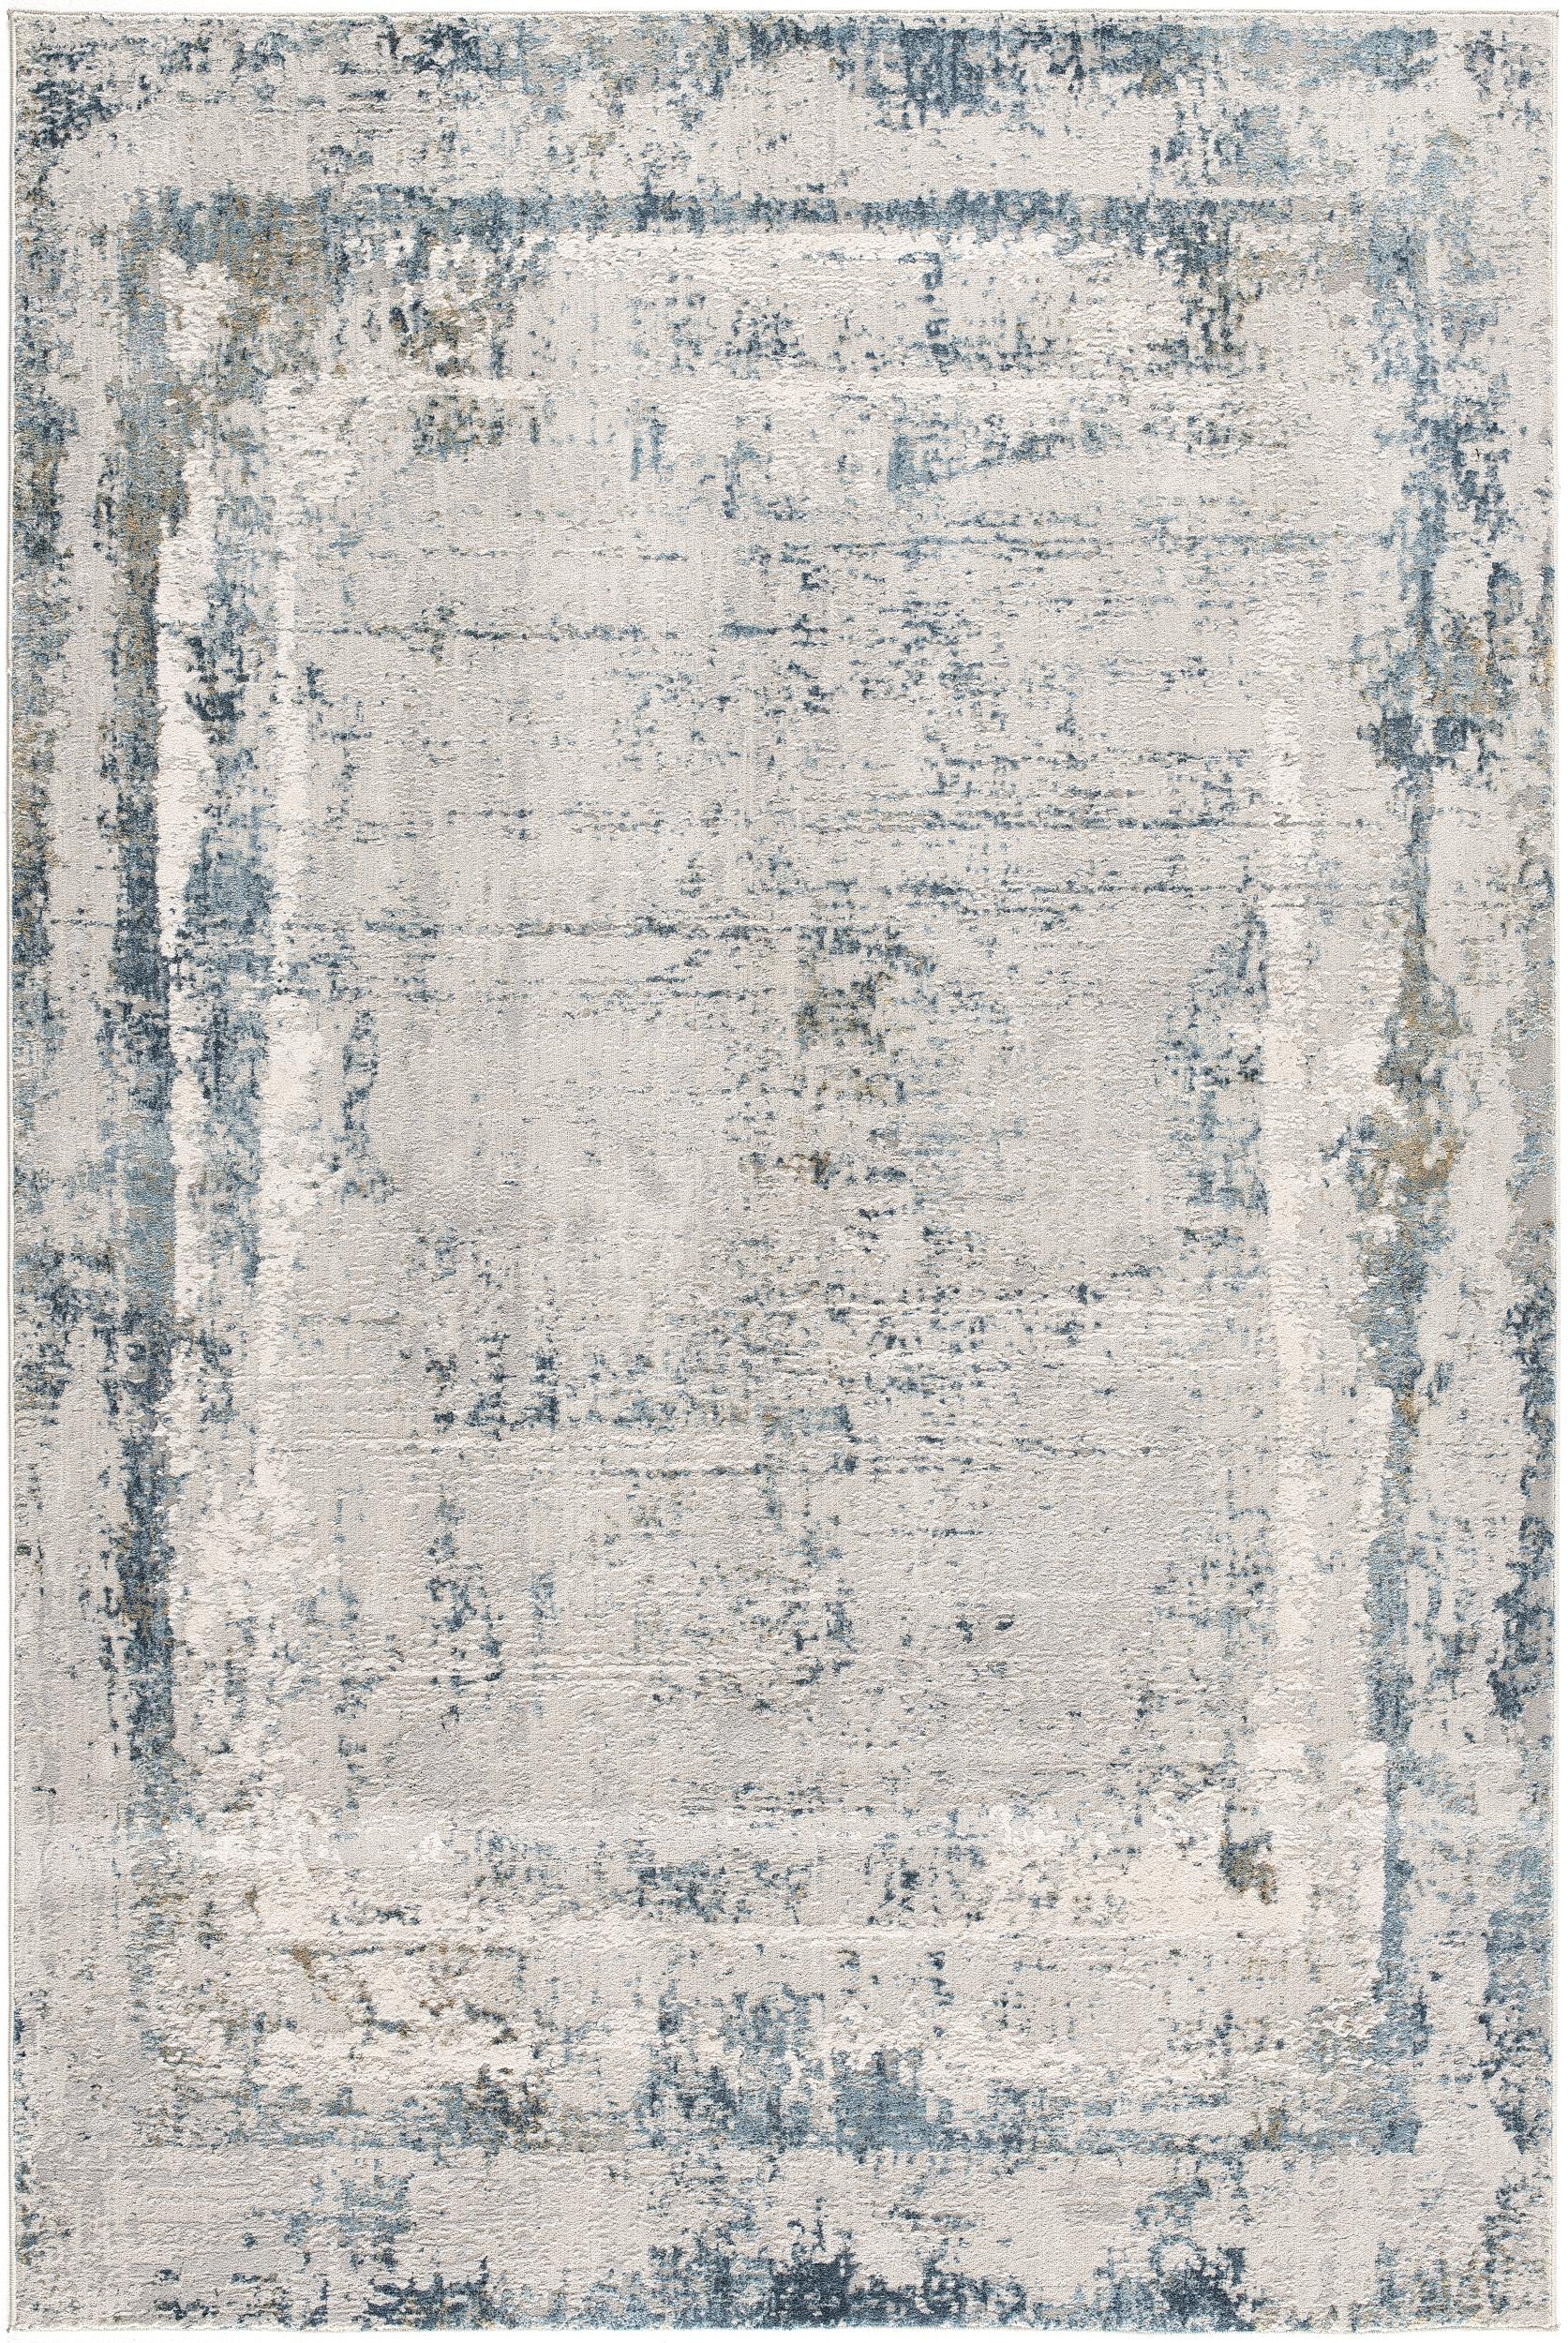 4’ X 6’ Ivory And Blue Abstract Distressed Area Rug